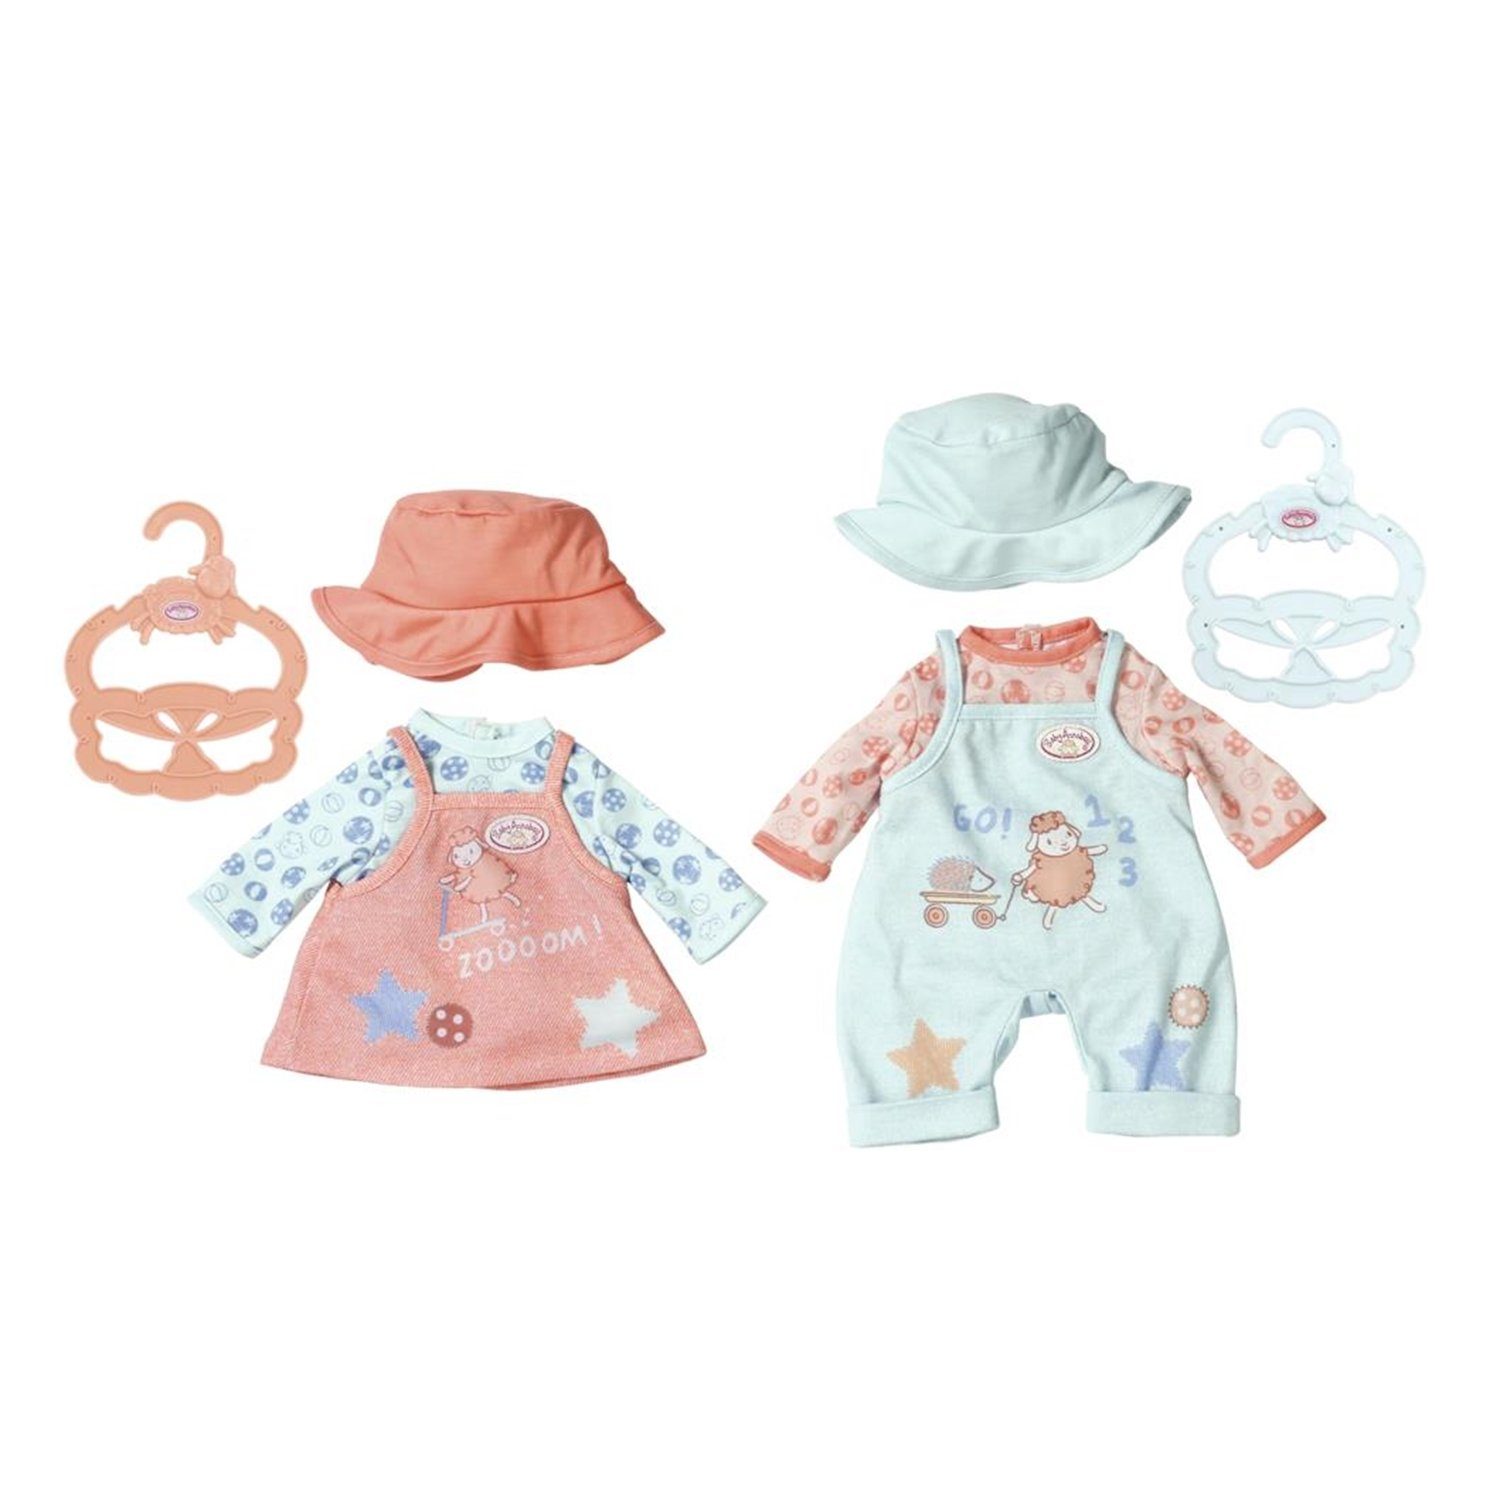 Zapf Creation® Puppenkleidung 702994 Baby Annabell Little Babyoutfit 36 cm